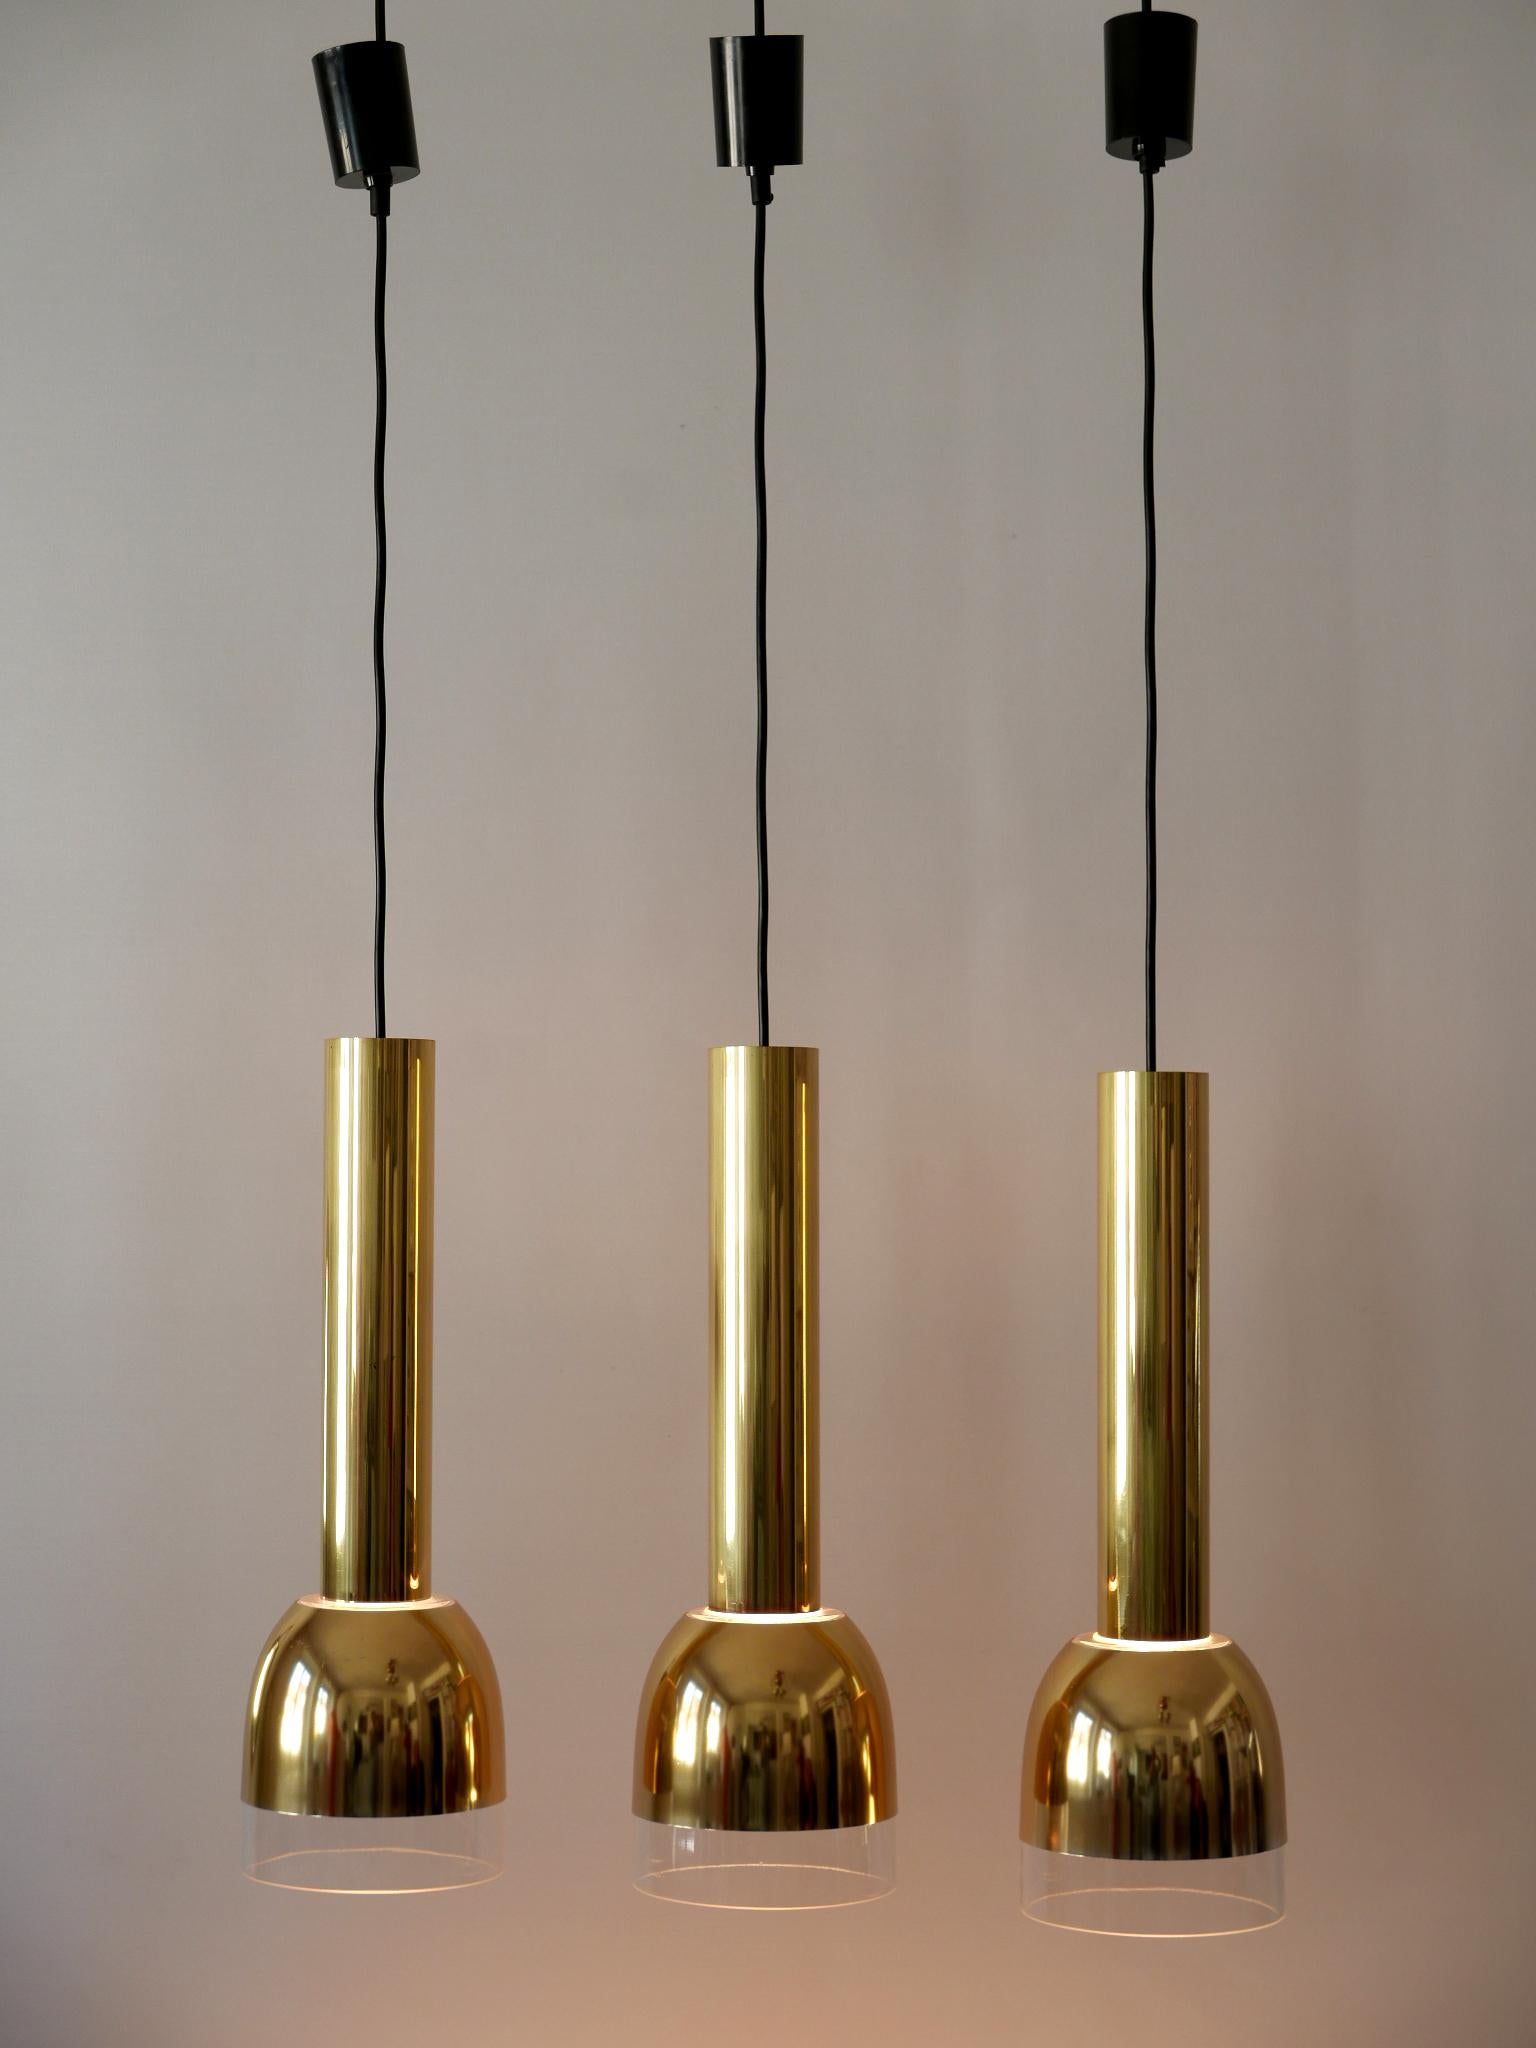 Set of Three Mid-Century Modern Pendant Lamps by Glashütte Limburg Germany 1970s In Good Condition For Sale In Munich, DE